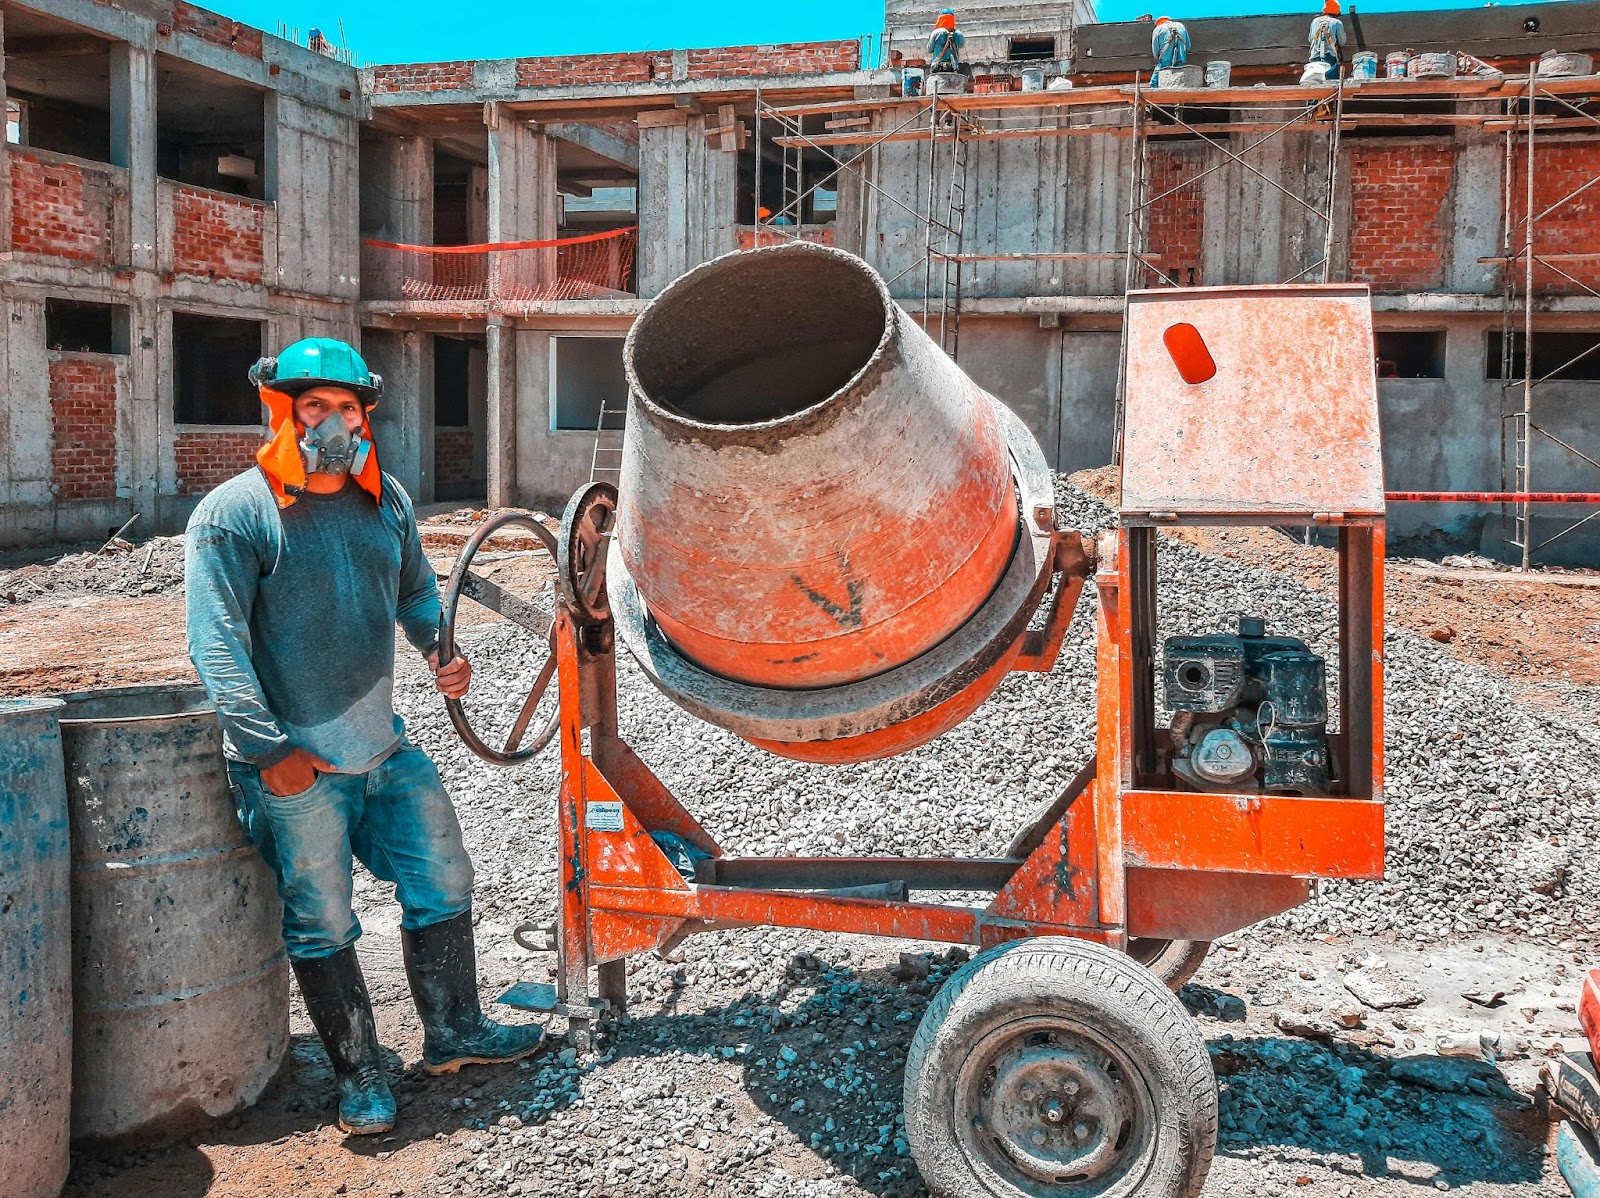 Construction worker operates a concrete mixer, a key piece of heavy construction machinery